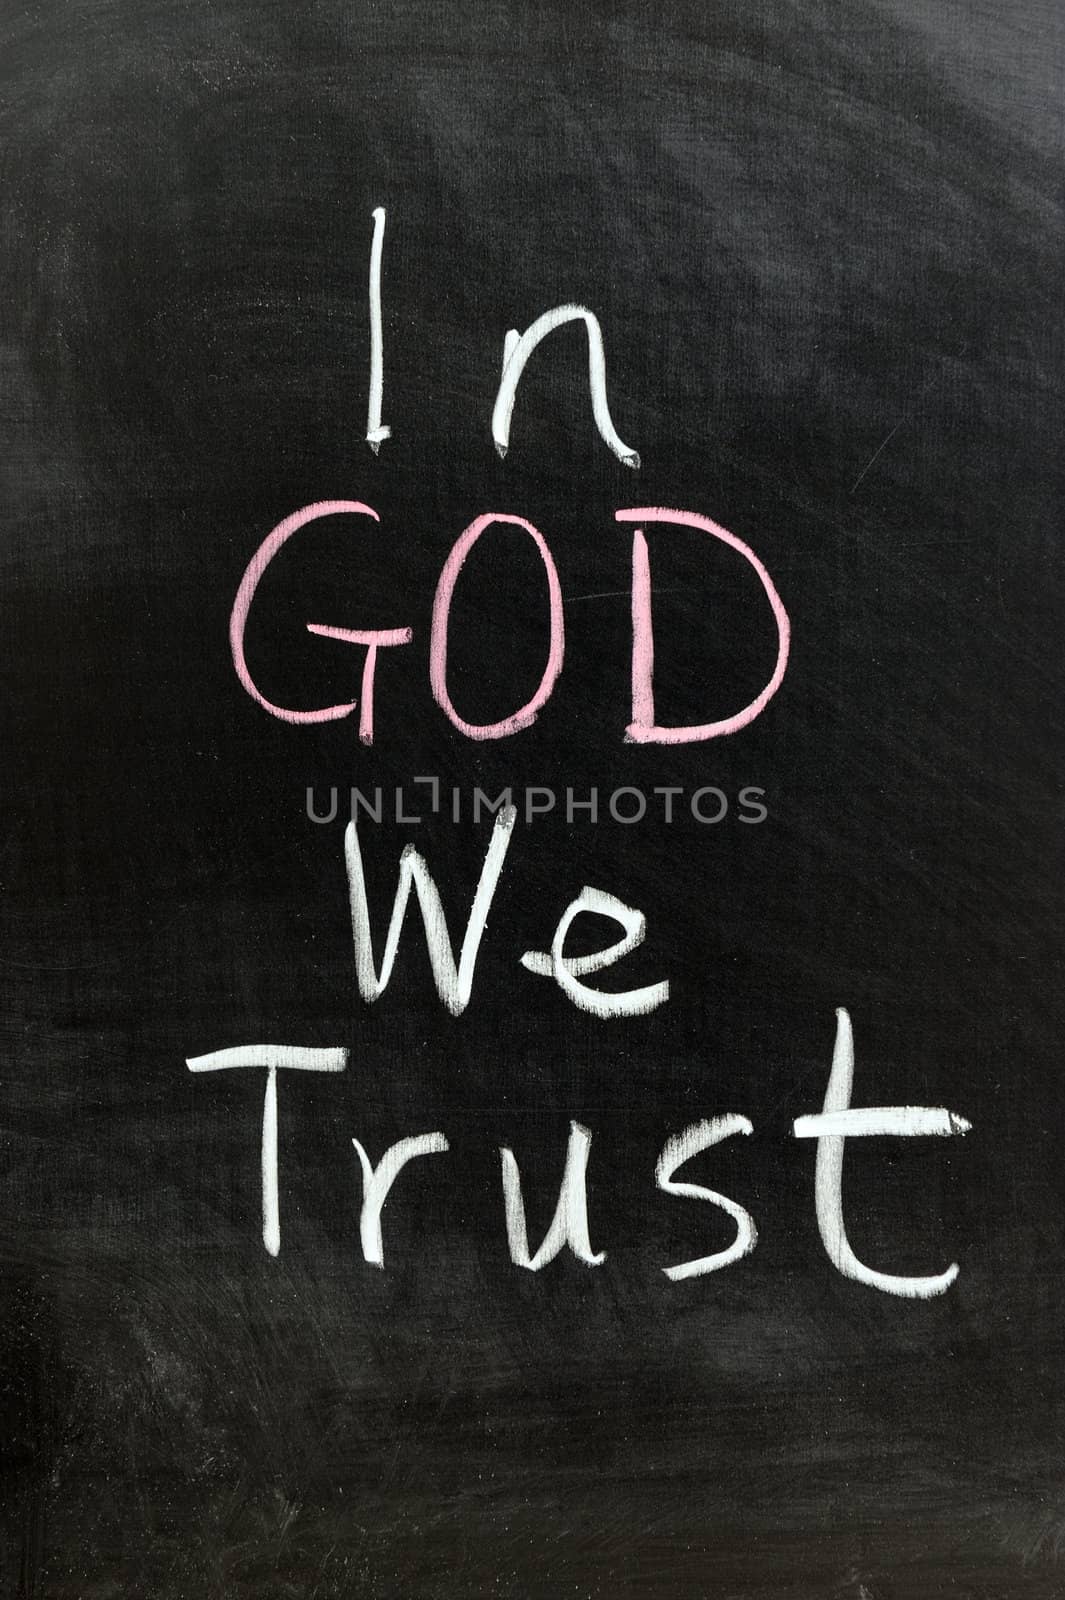 Conceptional chalk drawing - In god we trust